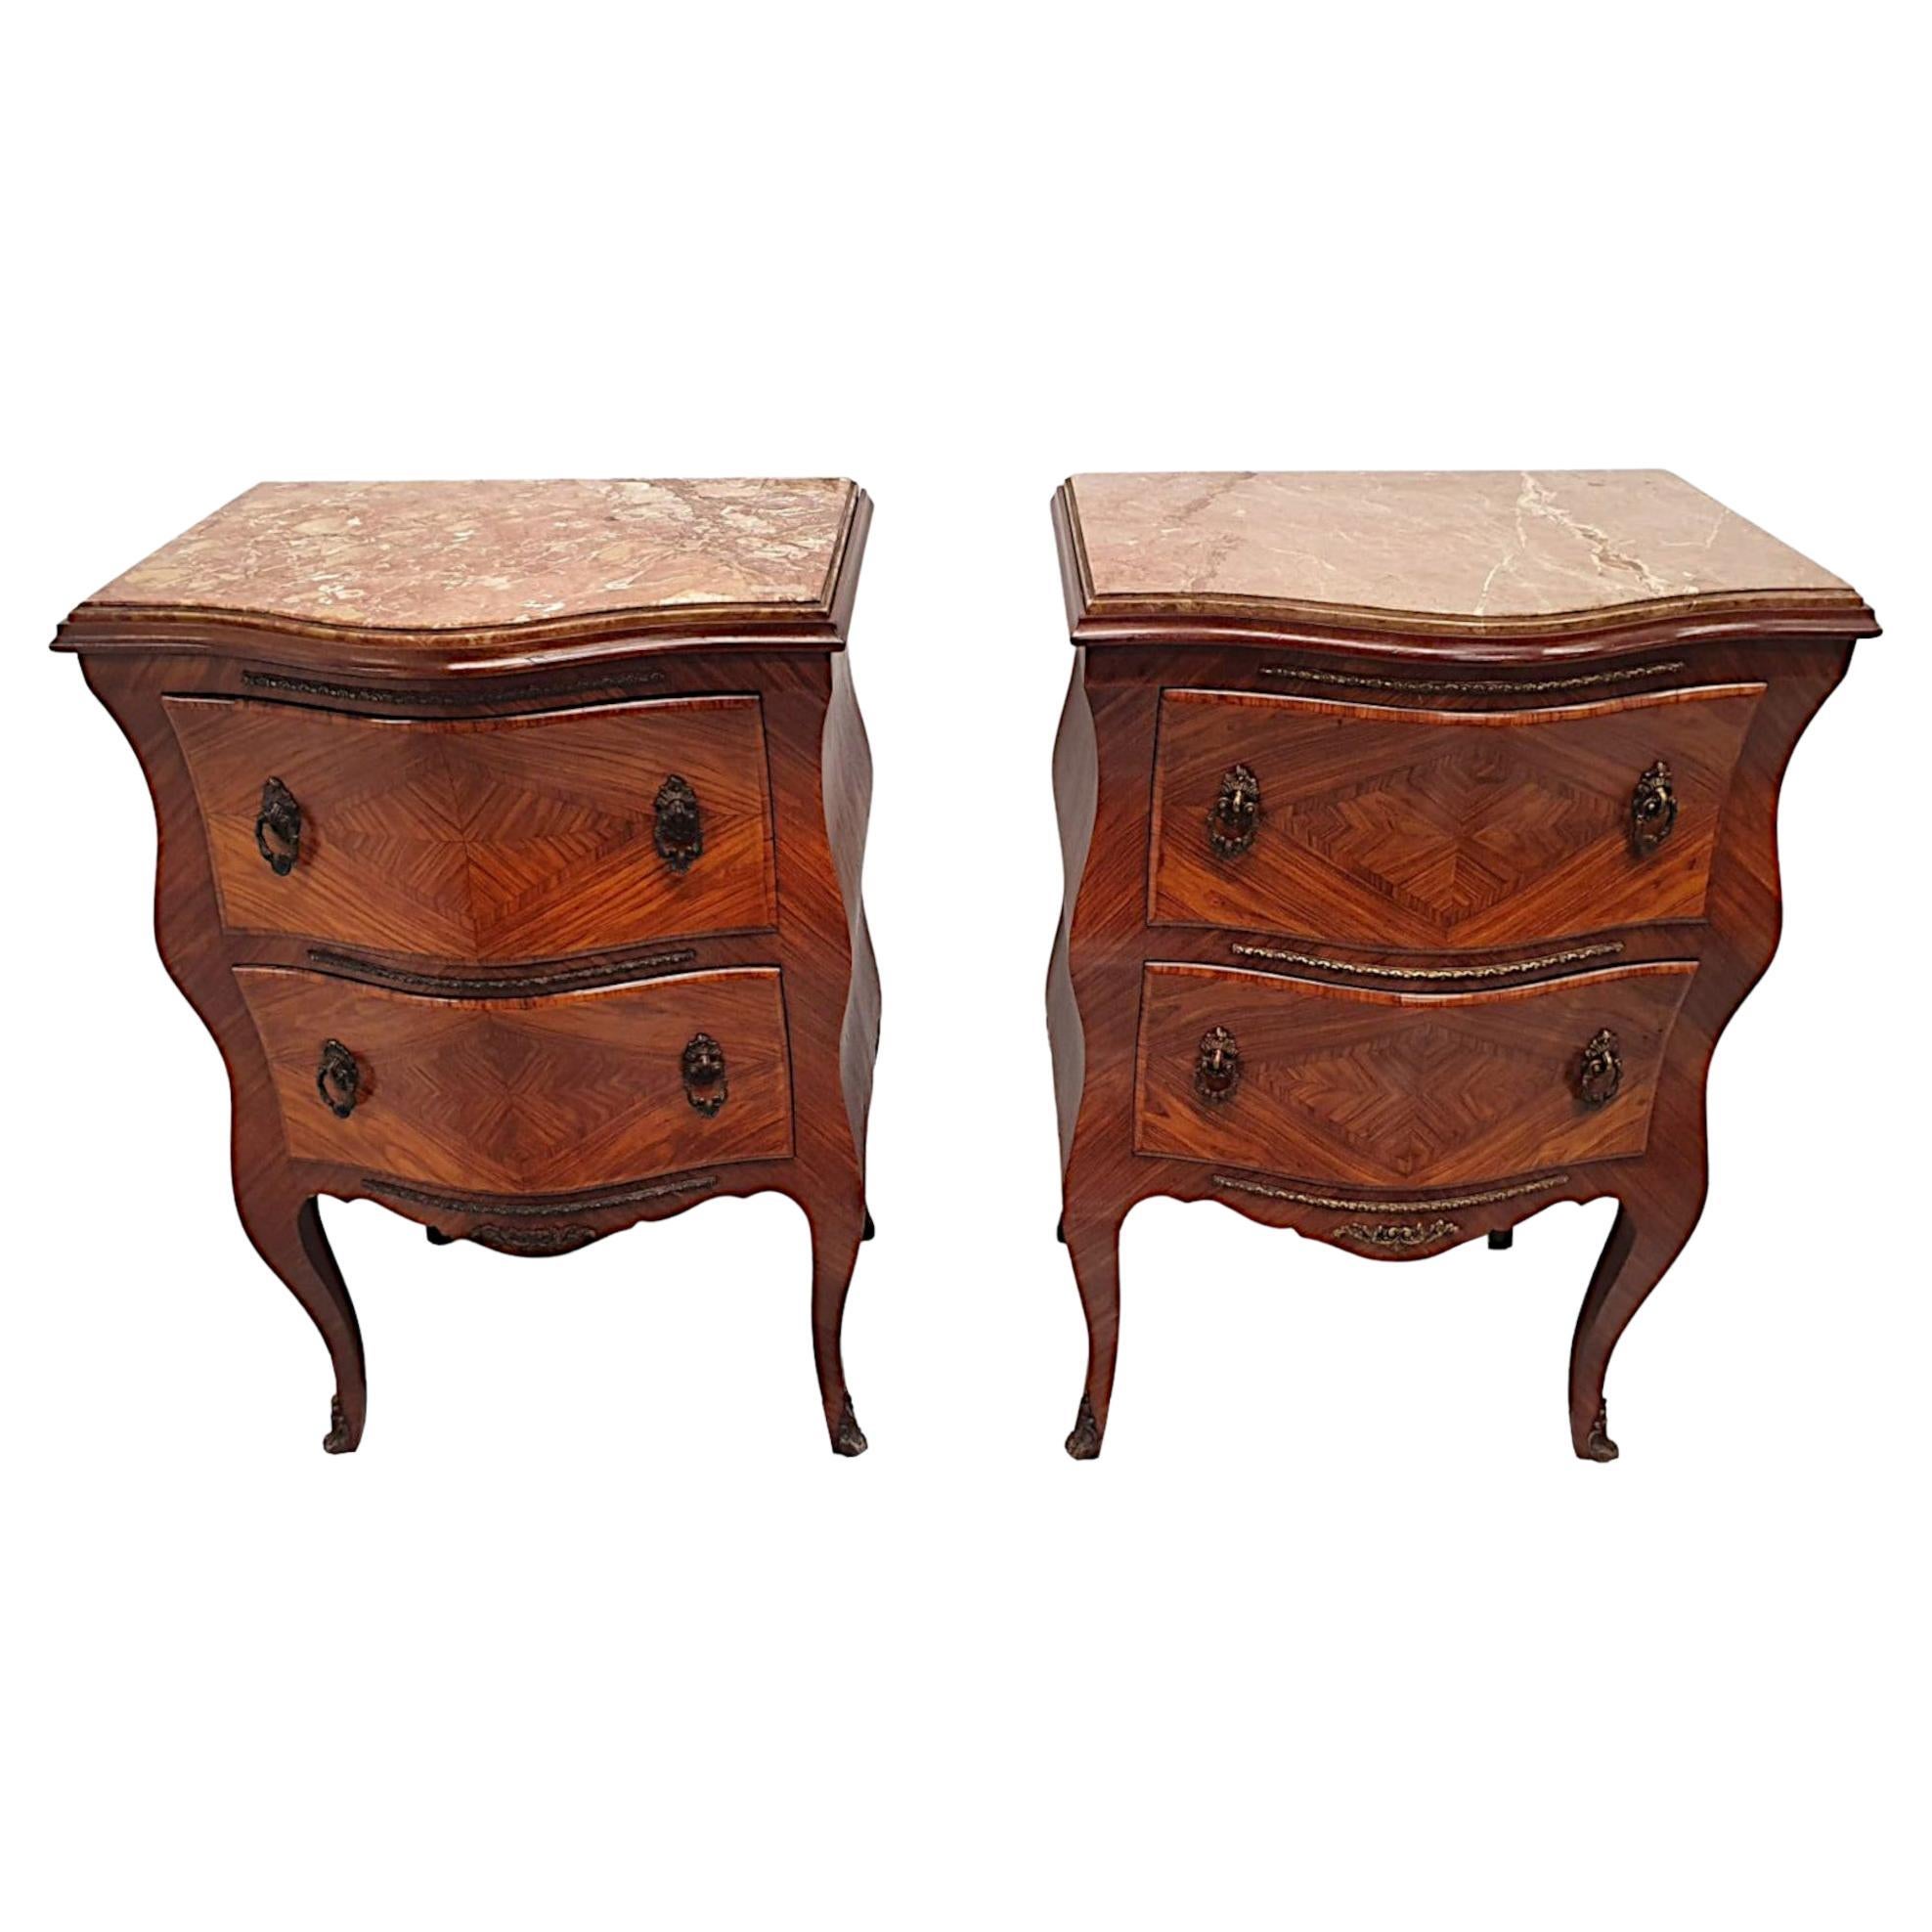 Very Fine 19th Century Pair of Large Marble Top Chests